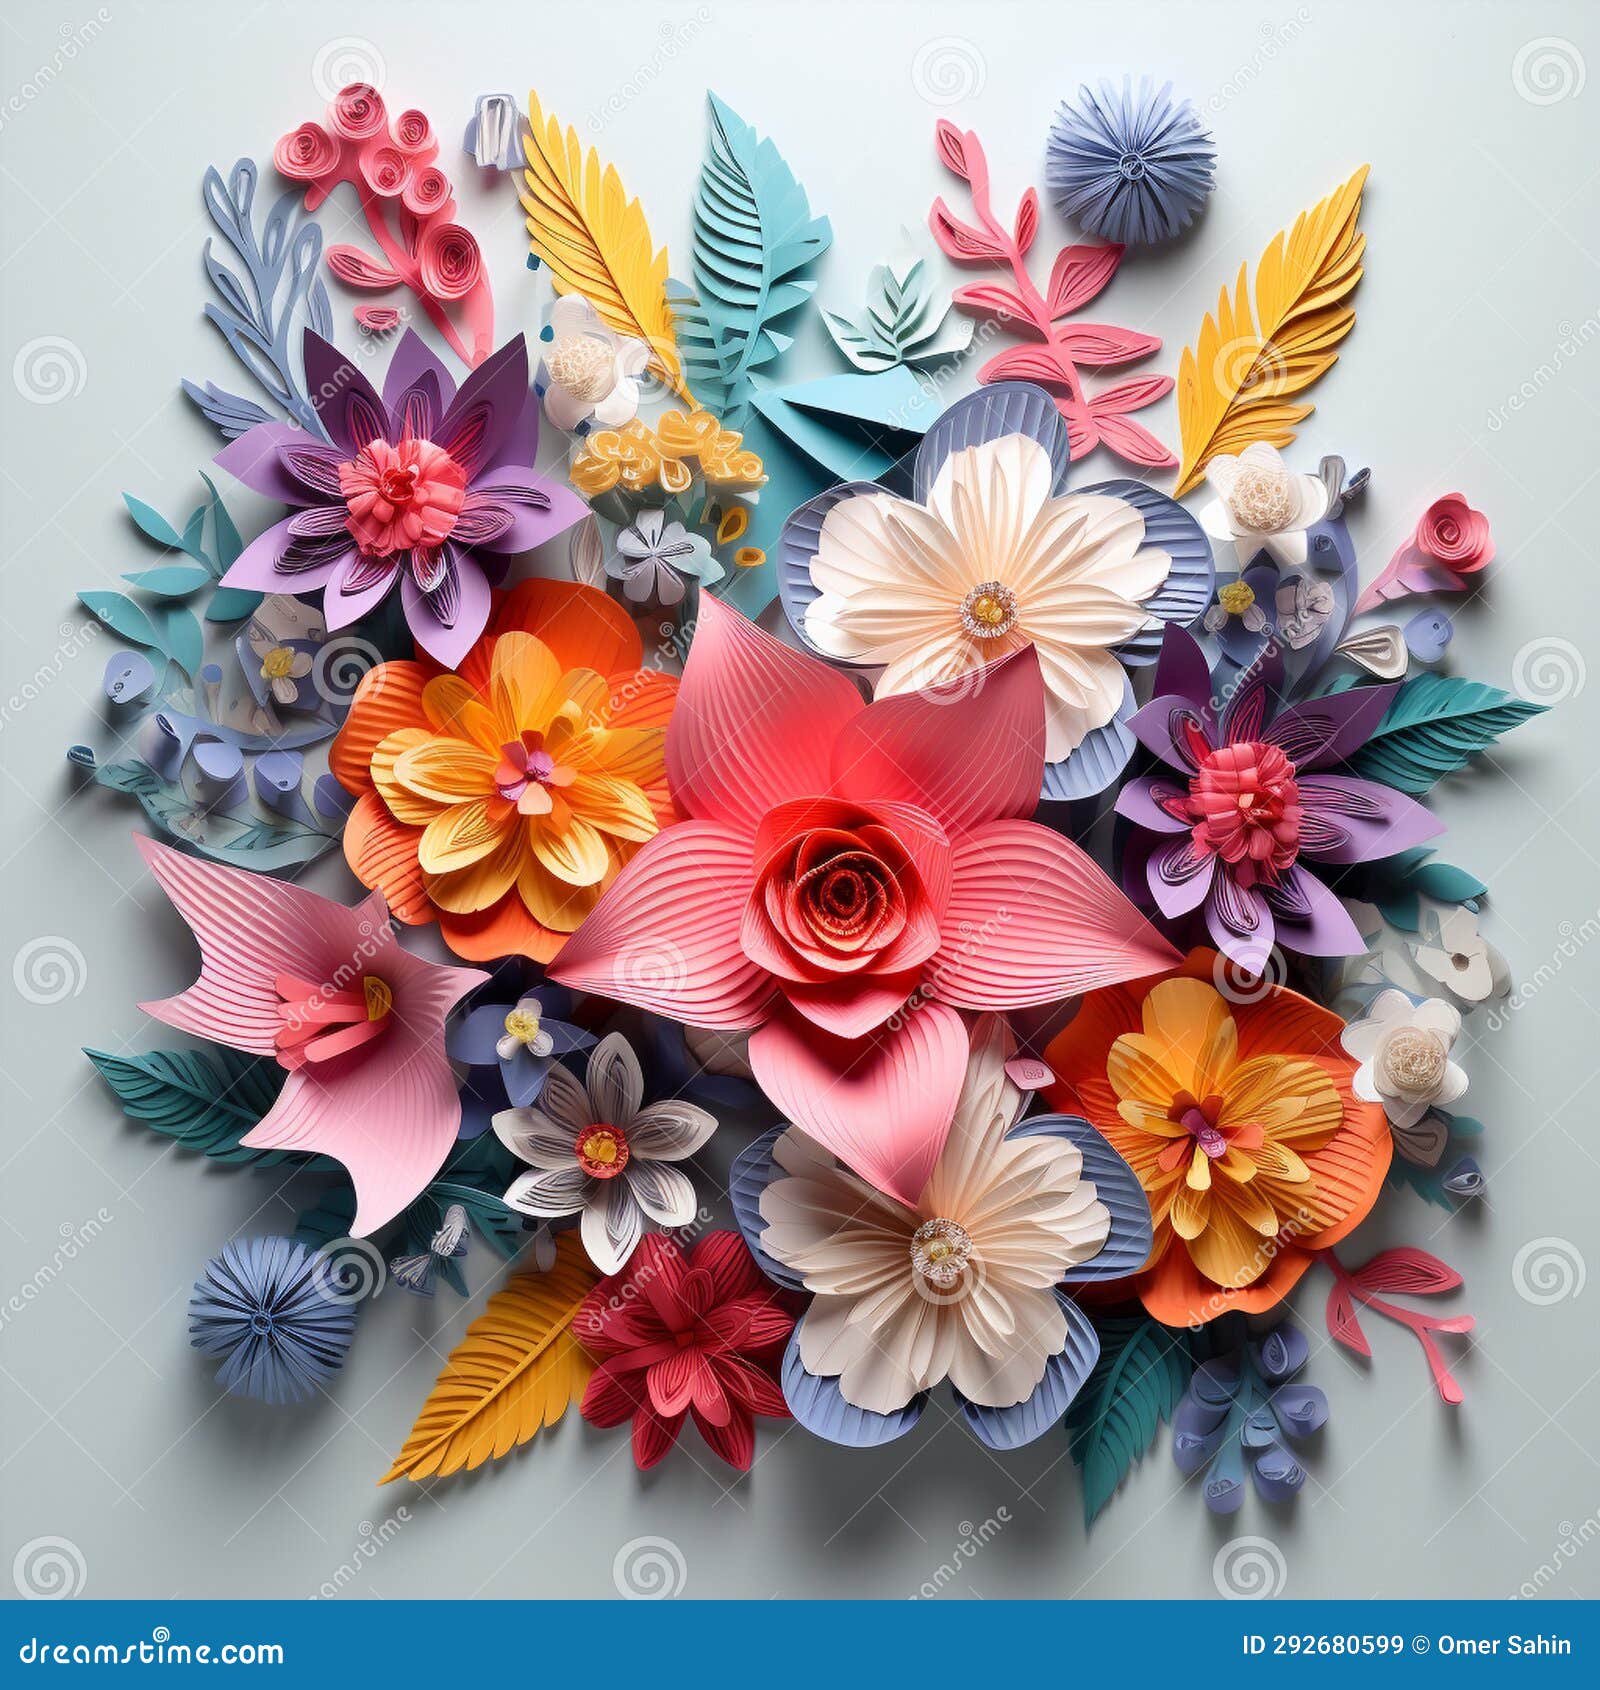 floral symphony in paper